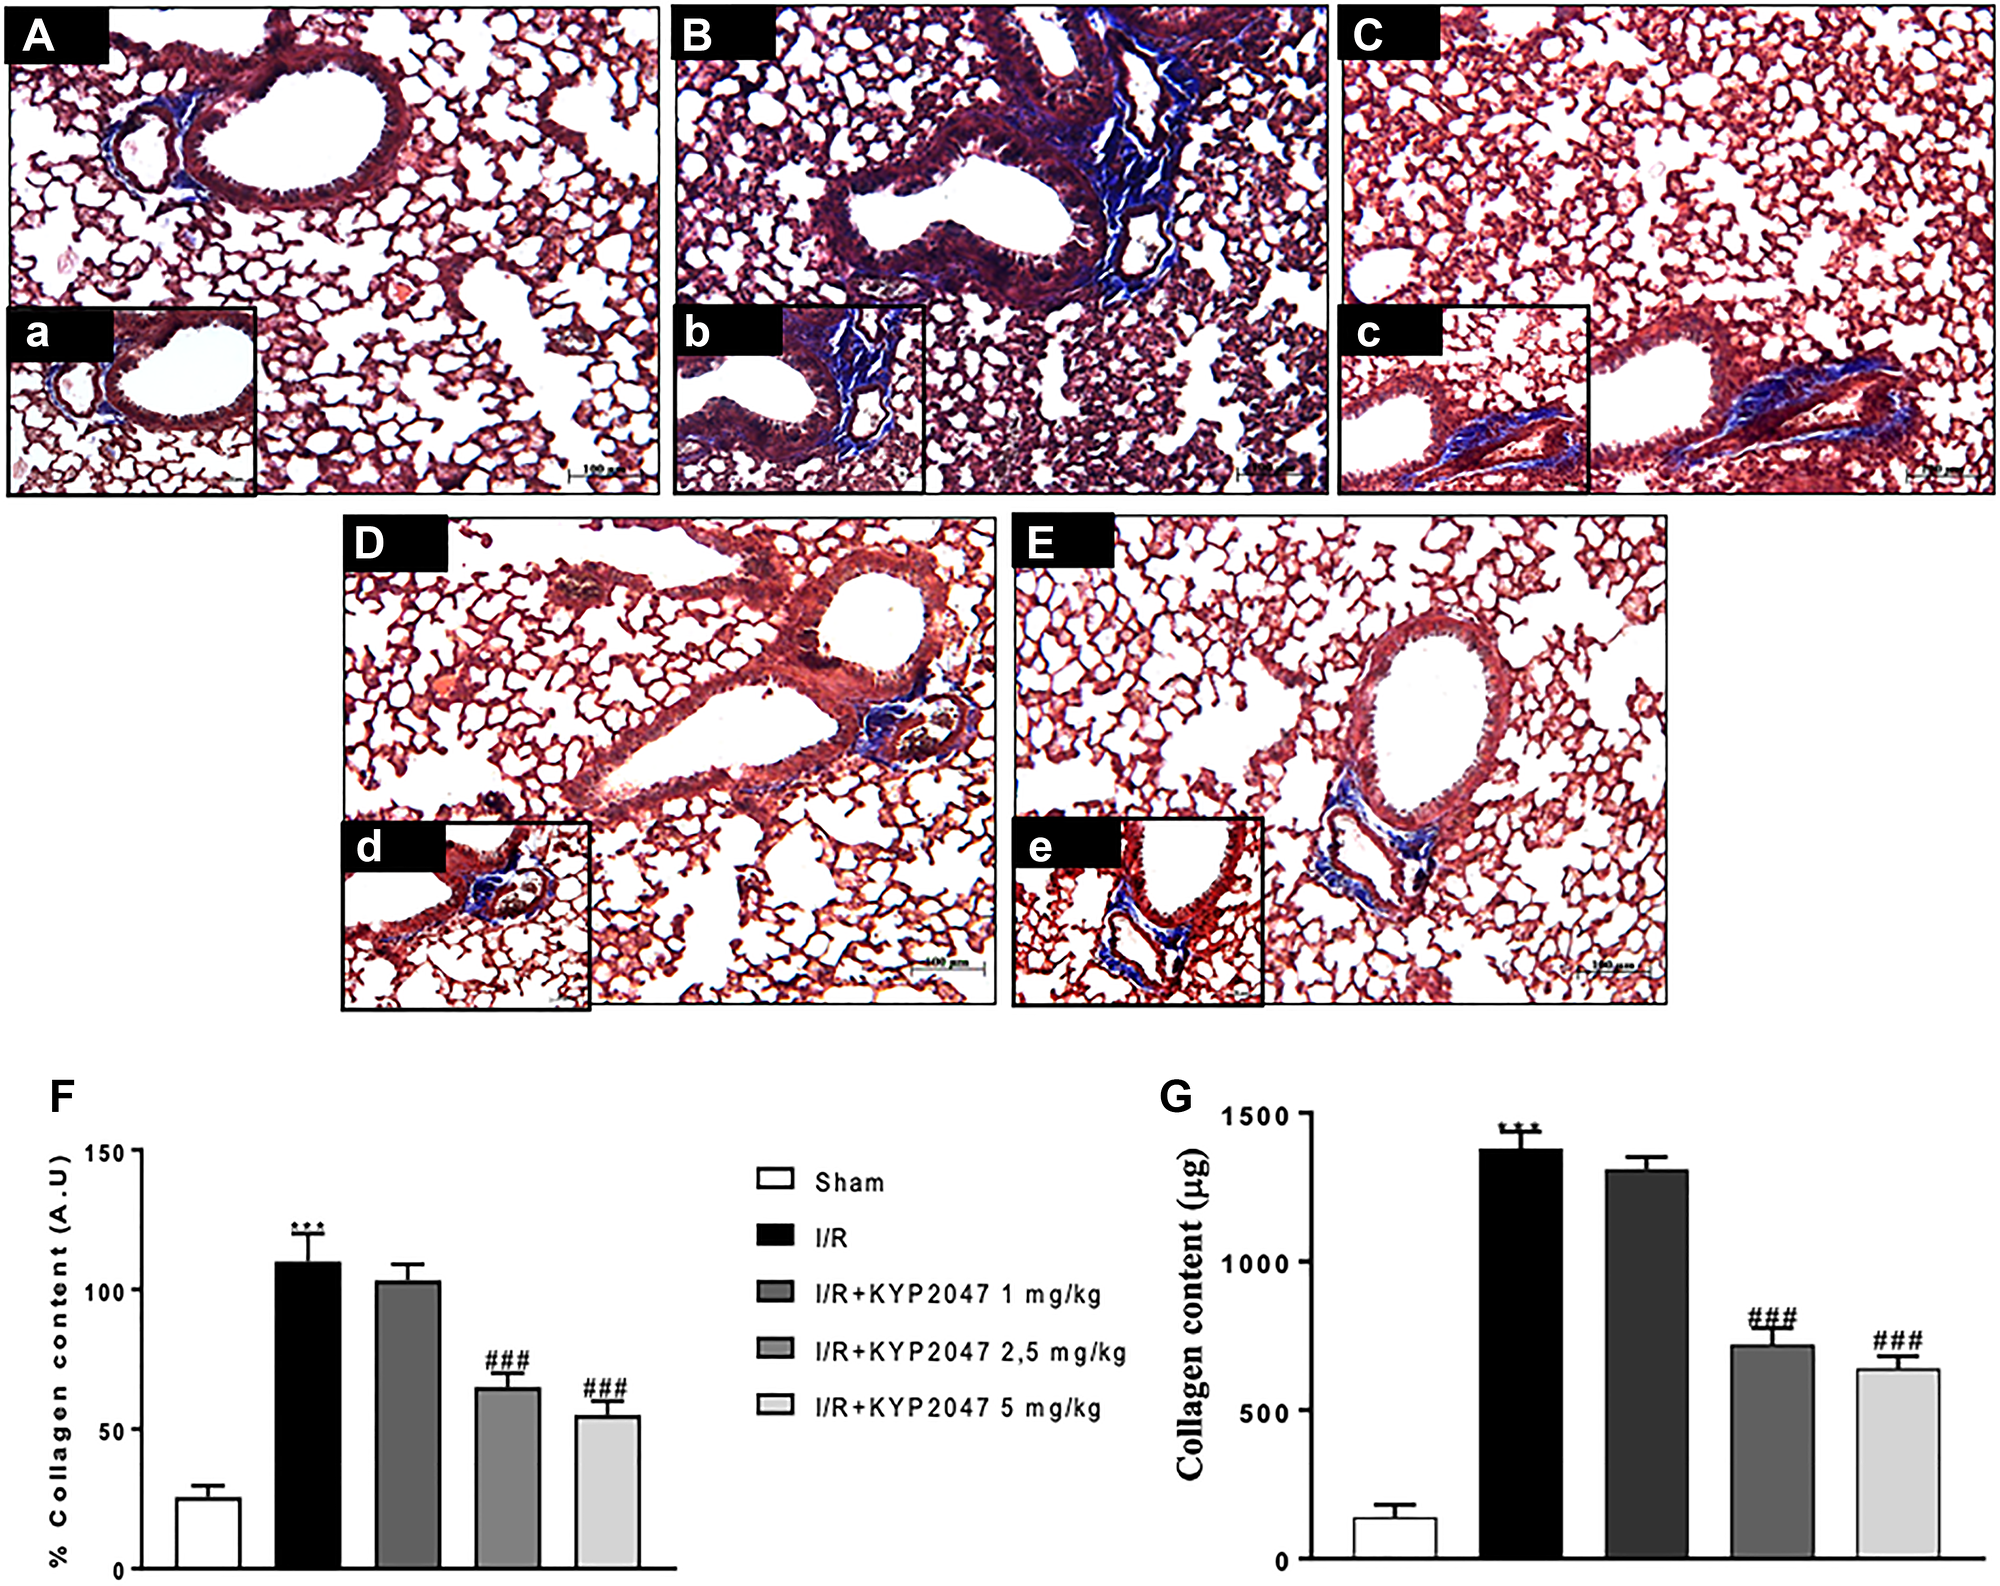 Role of KYP-2047 treatment on the collagen content.